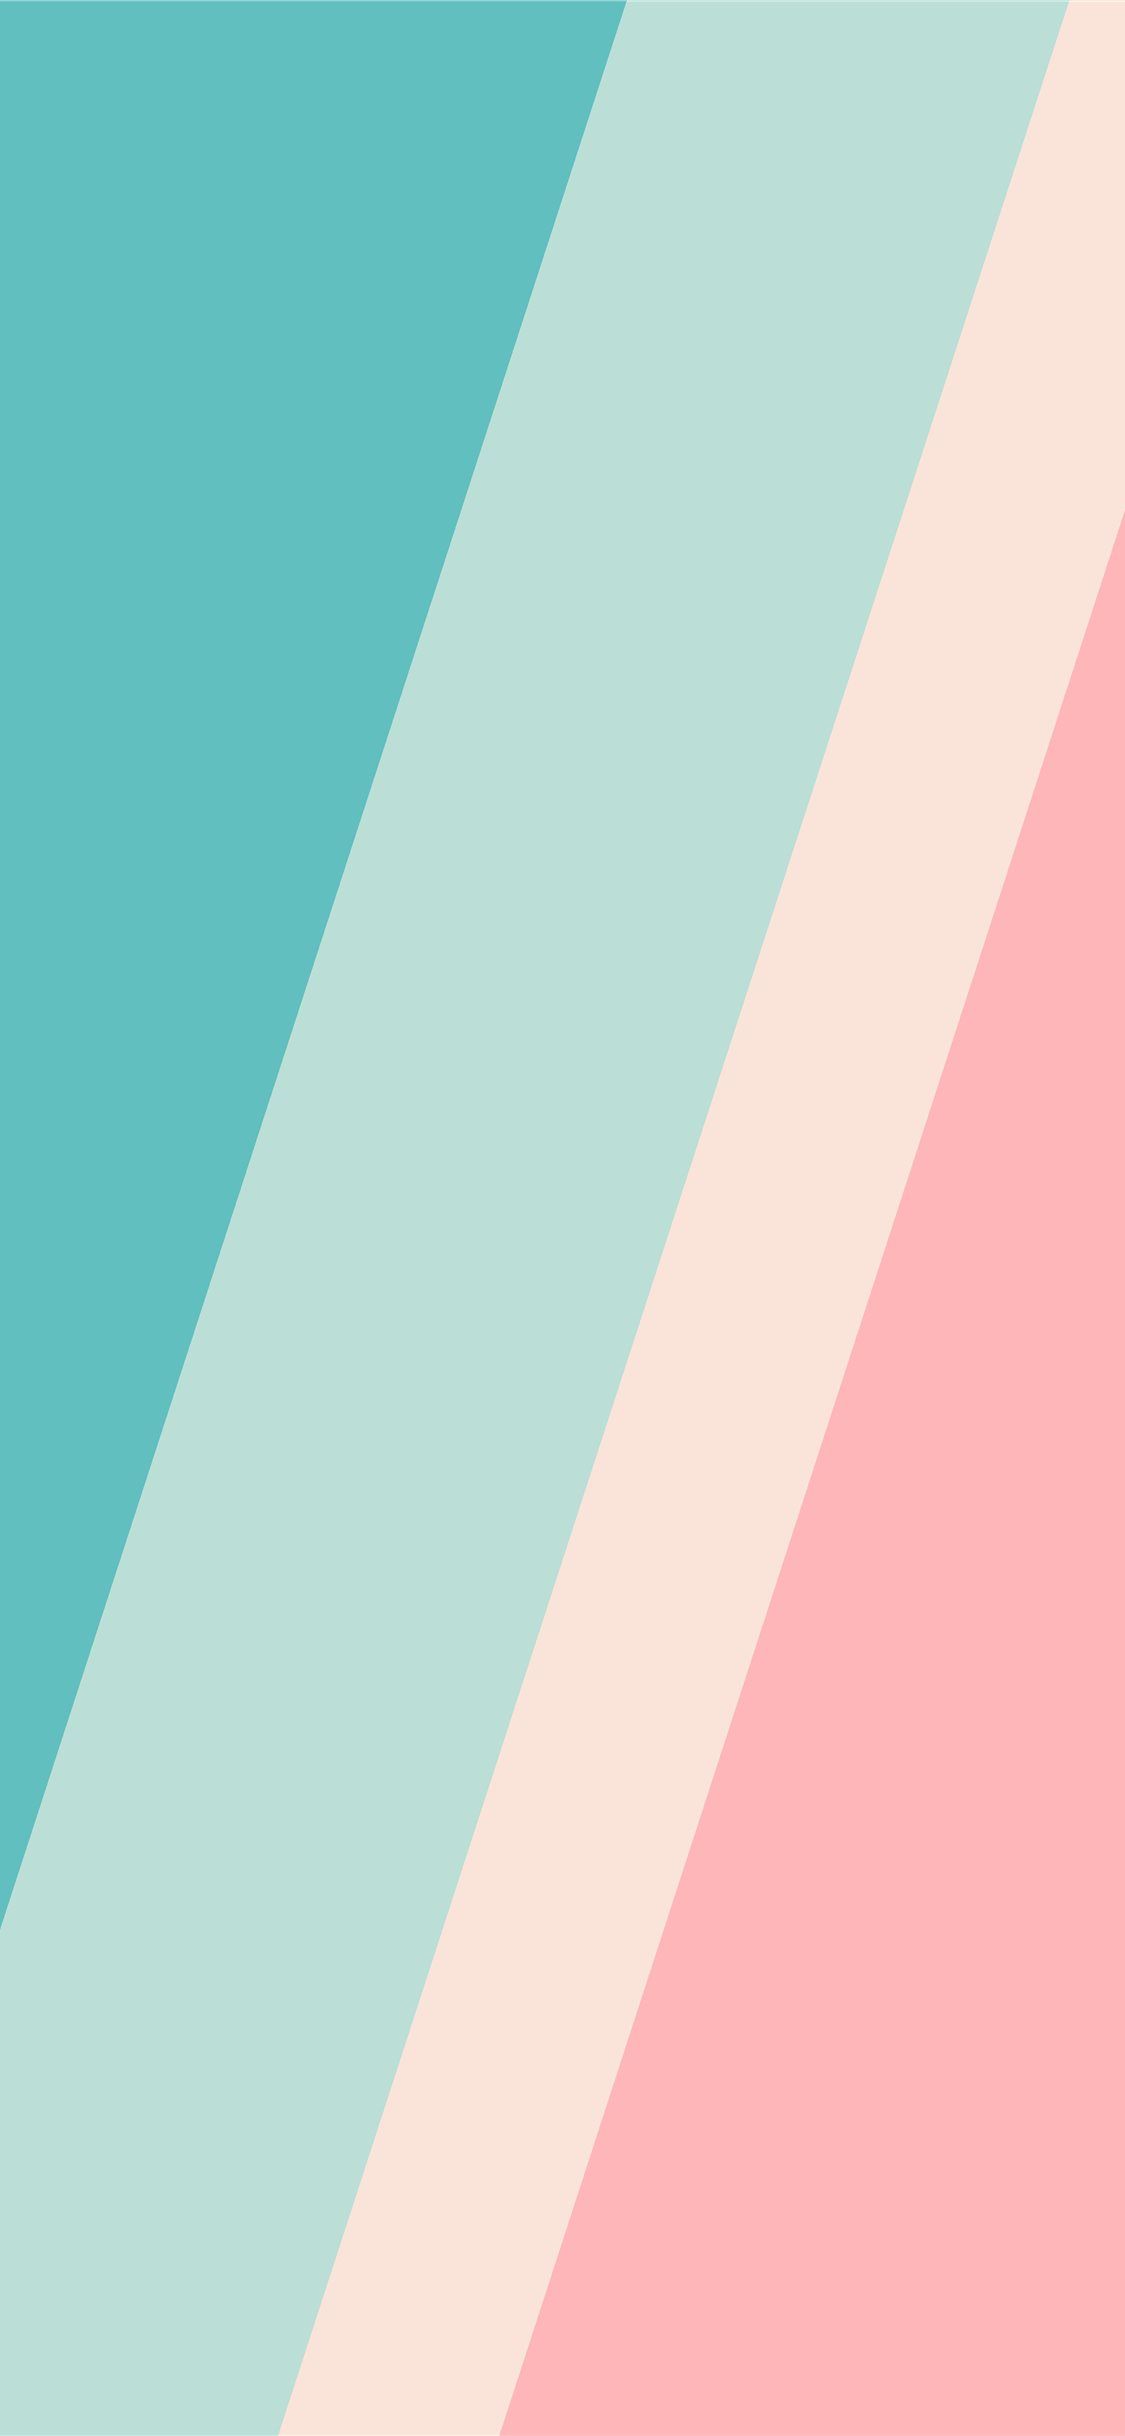 pink and teal striped textile #teal. Teal wallpaper iphone, Stripe iphone wallpaper, Blue wallpaper iphone